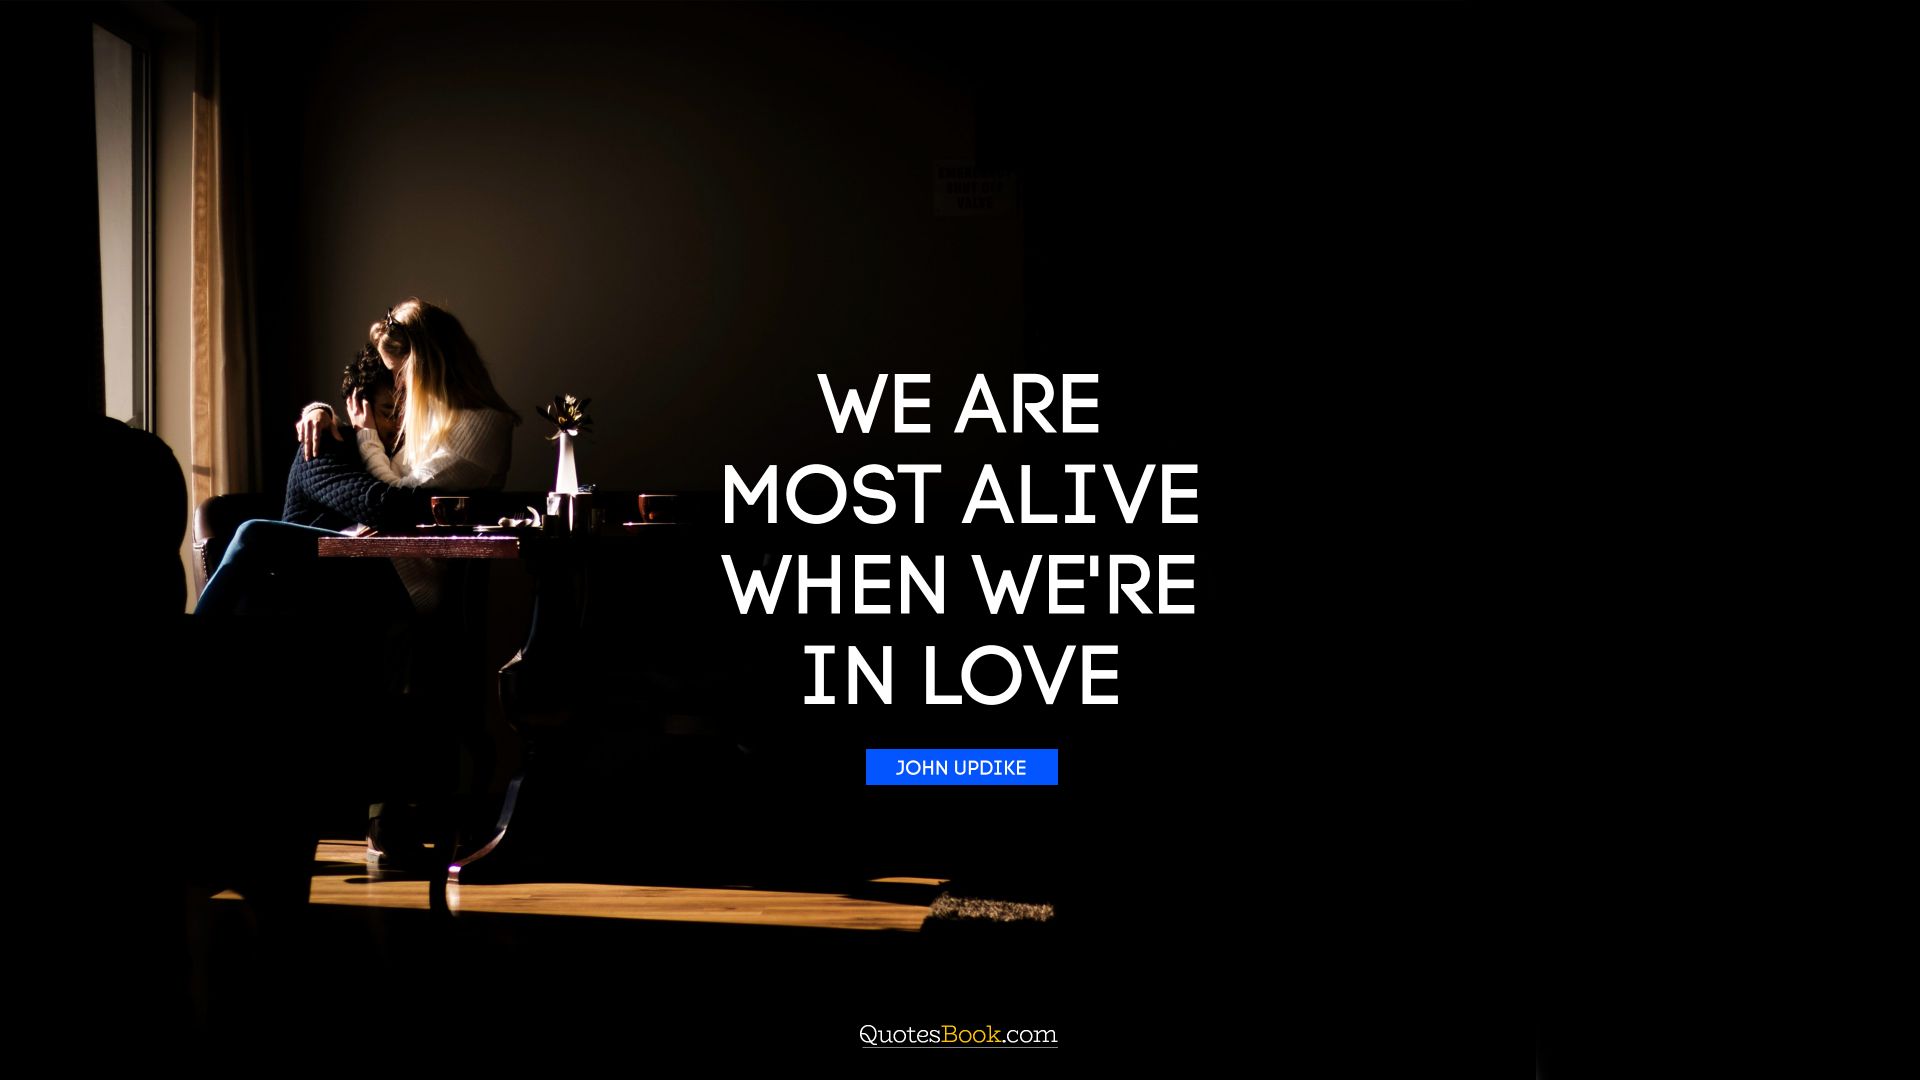 We are most alive when we're in love. - Quote by John Updike